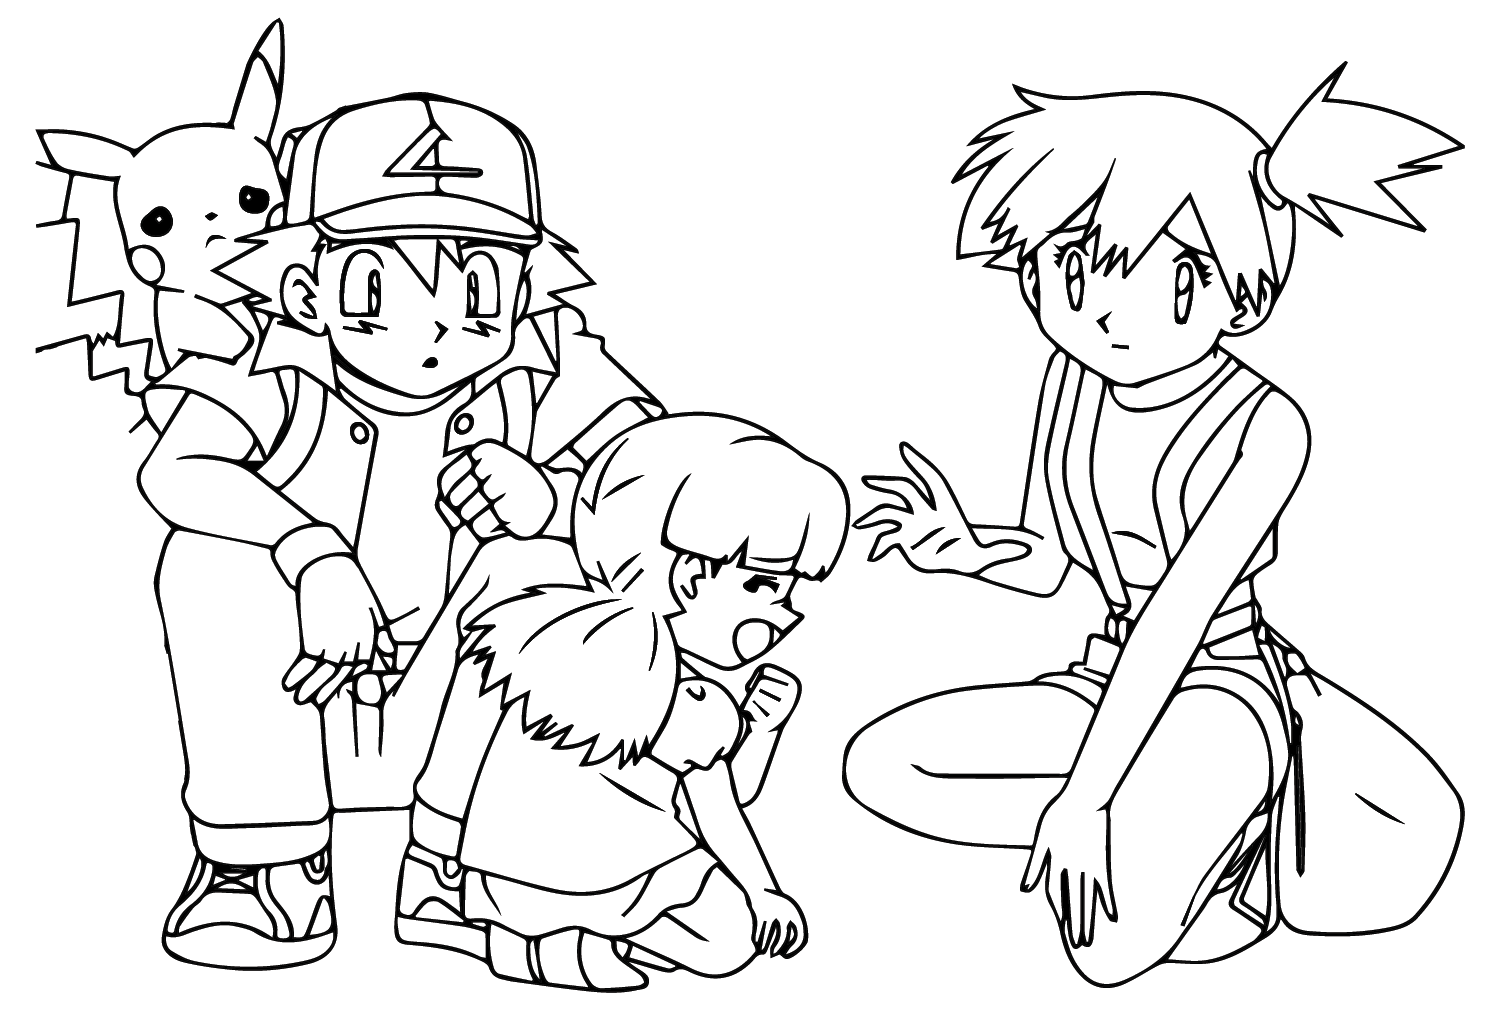 Ash,Misty to Color from Ash Ketchum